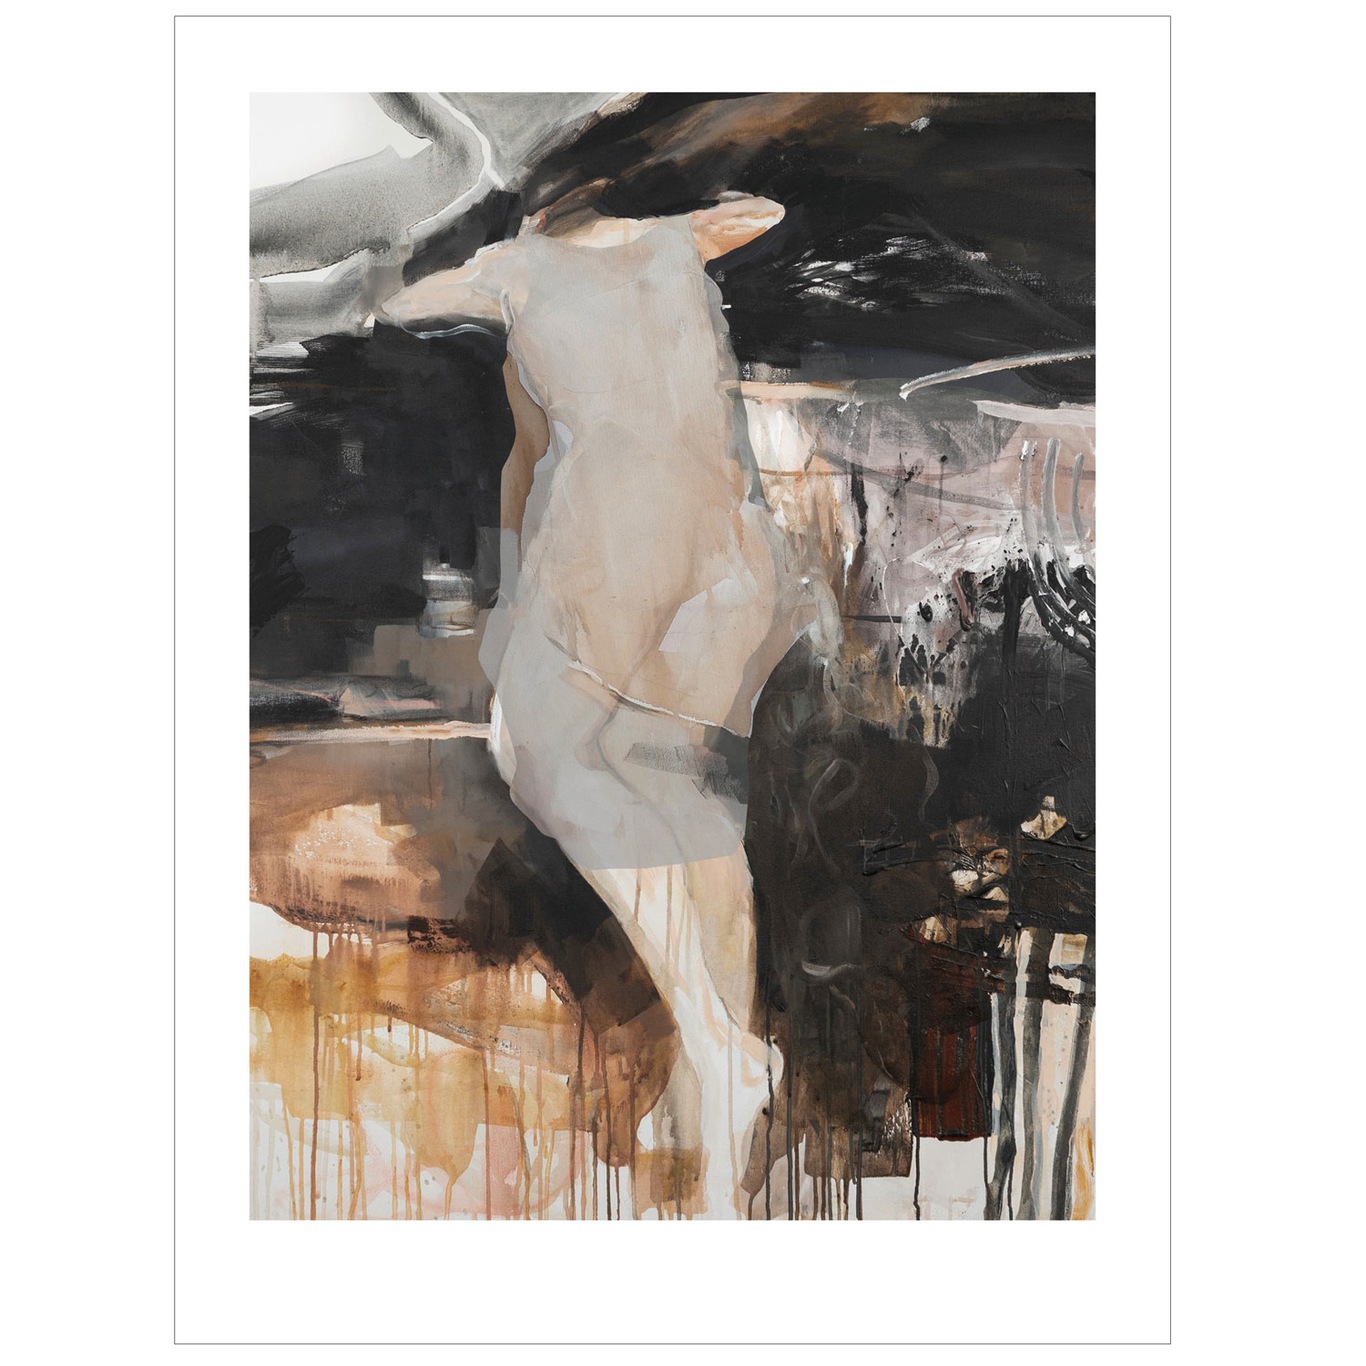 Floating Art Print Signed Limited Edition, 50x70 cm